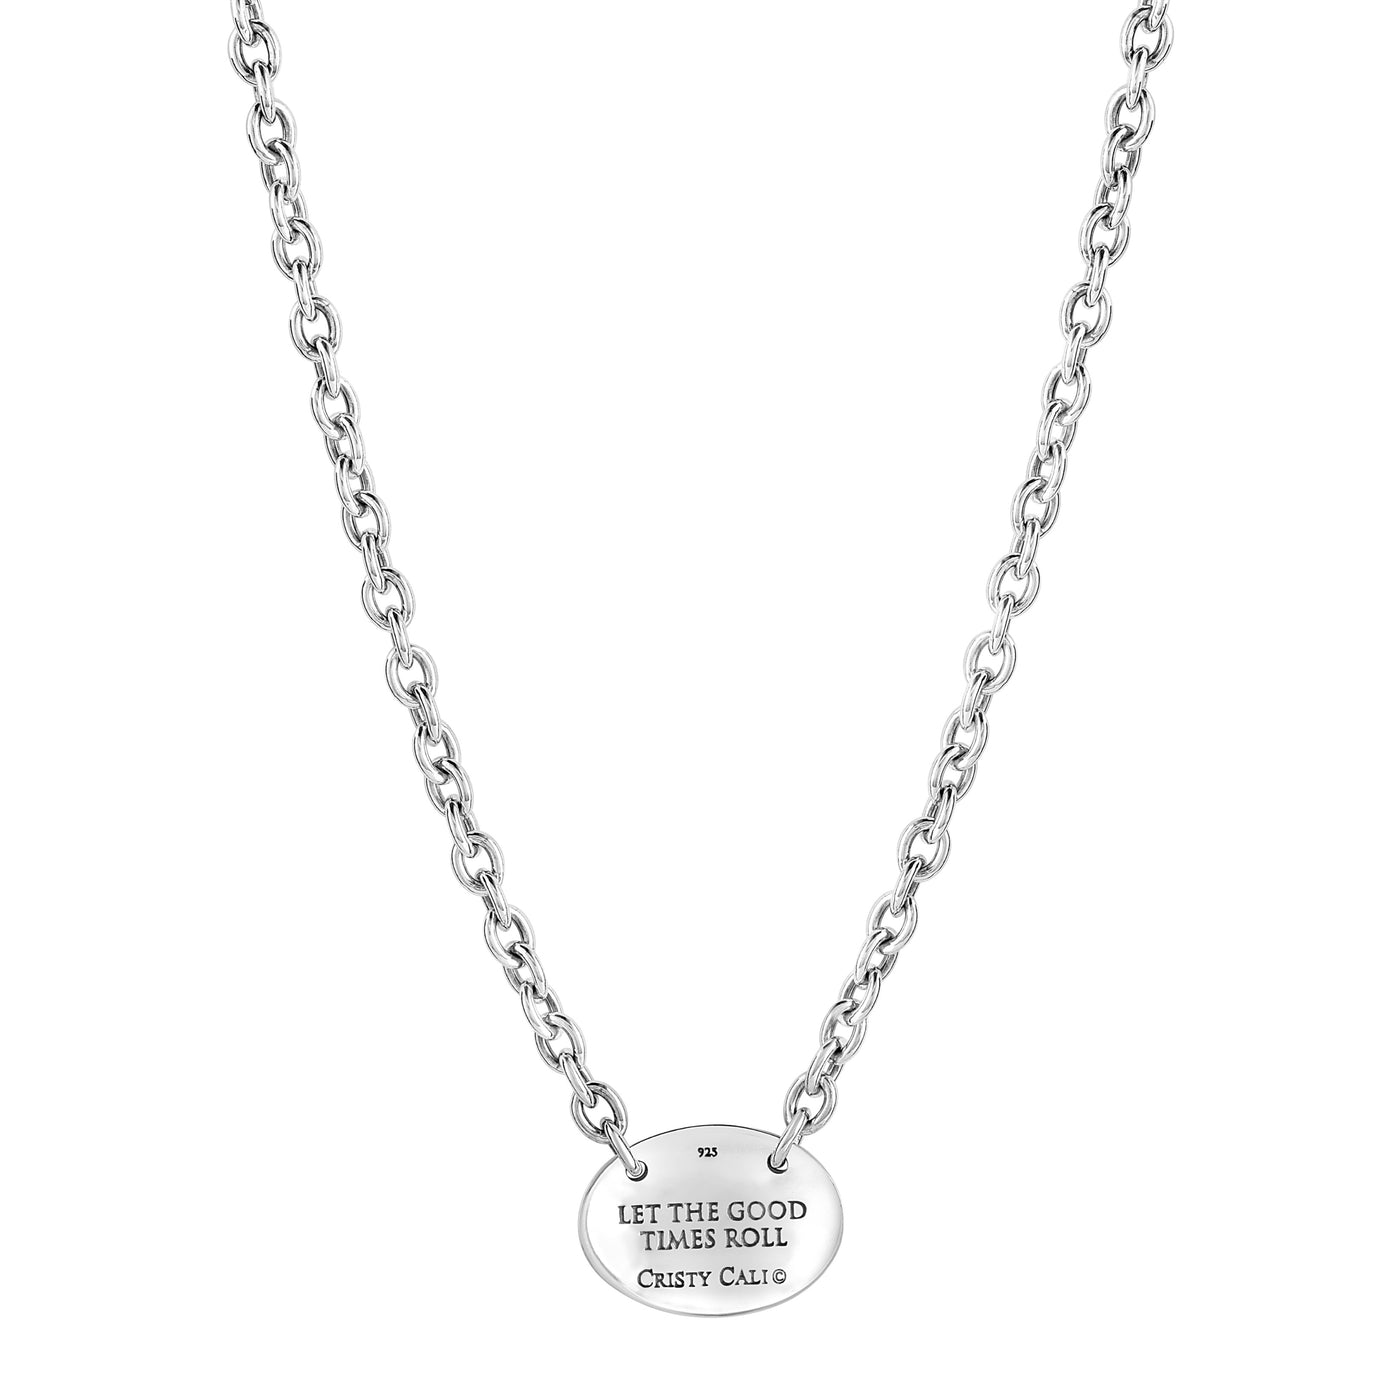 Please Return to New Orleans Oval Necklace - Small